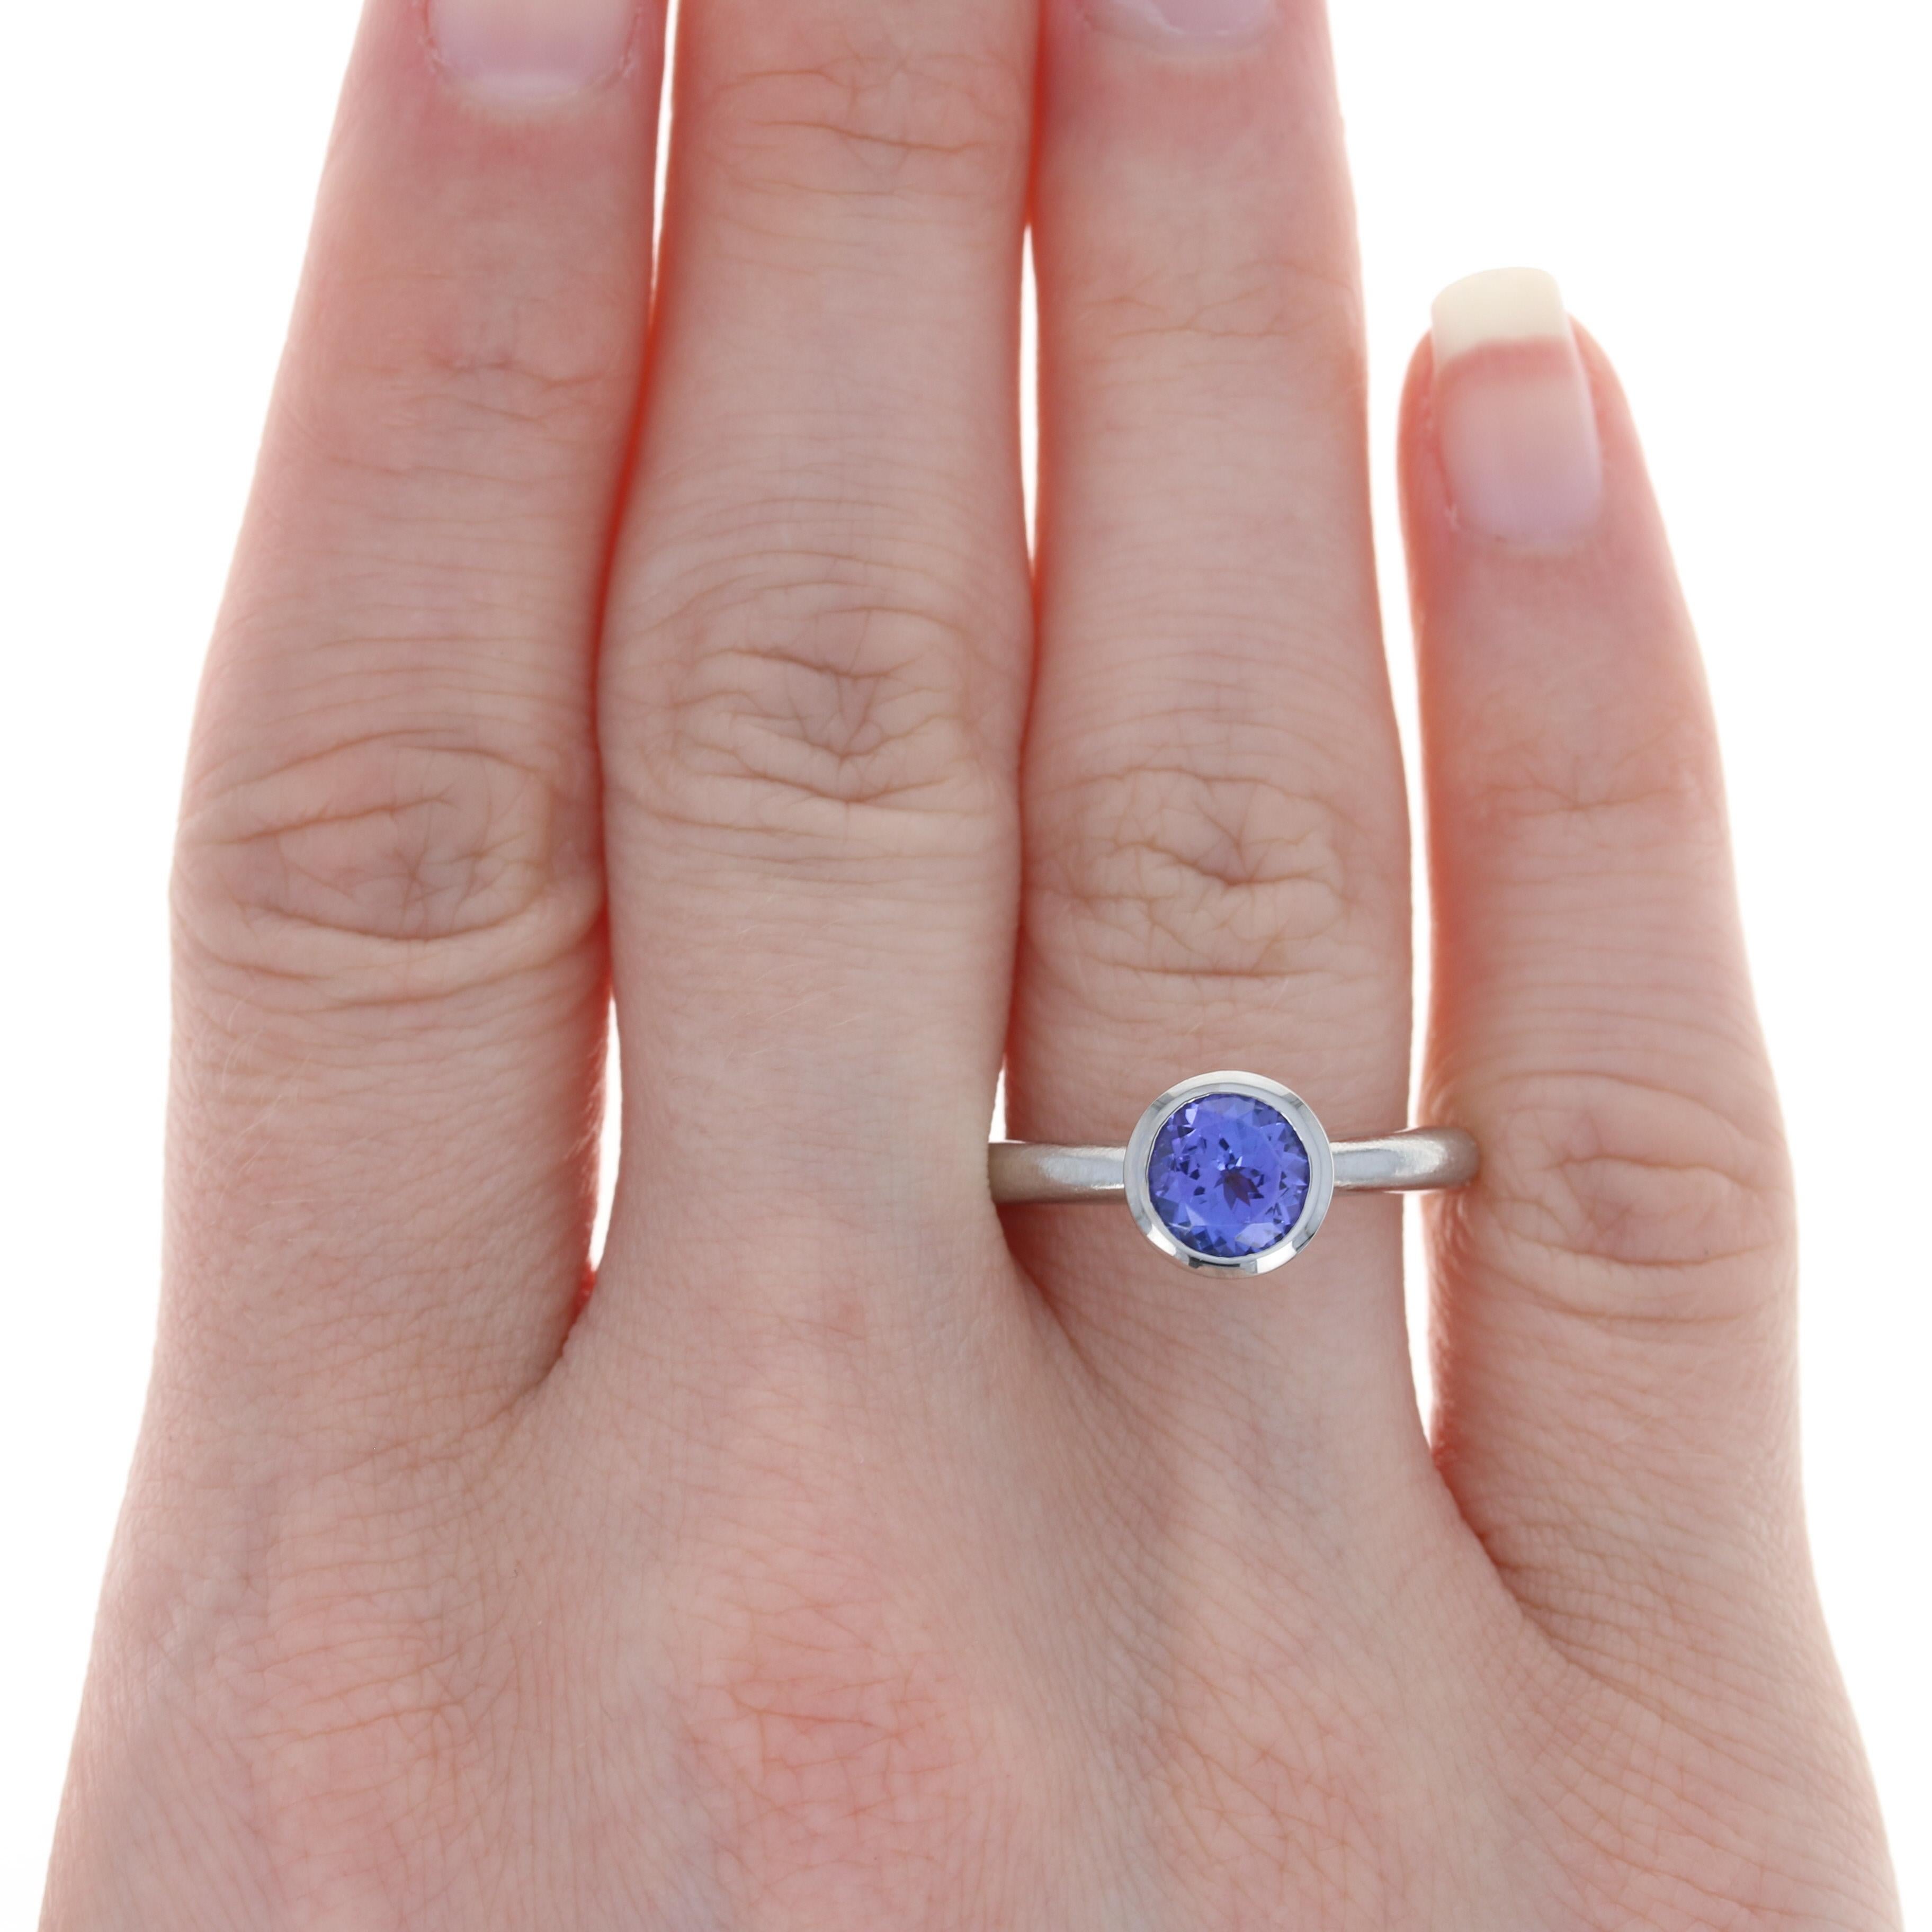 Size: 7

Metal Content: Palladium 

Stone Information: 
Genuine Tanzanite
Treatment: Routinely Enhanced
Carat: 1.60ct
Cut: Round
Color: Purple

Style: Solitaire
Features: Brushed & Smooth Finishes

Face Height (north to south): 11/32